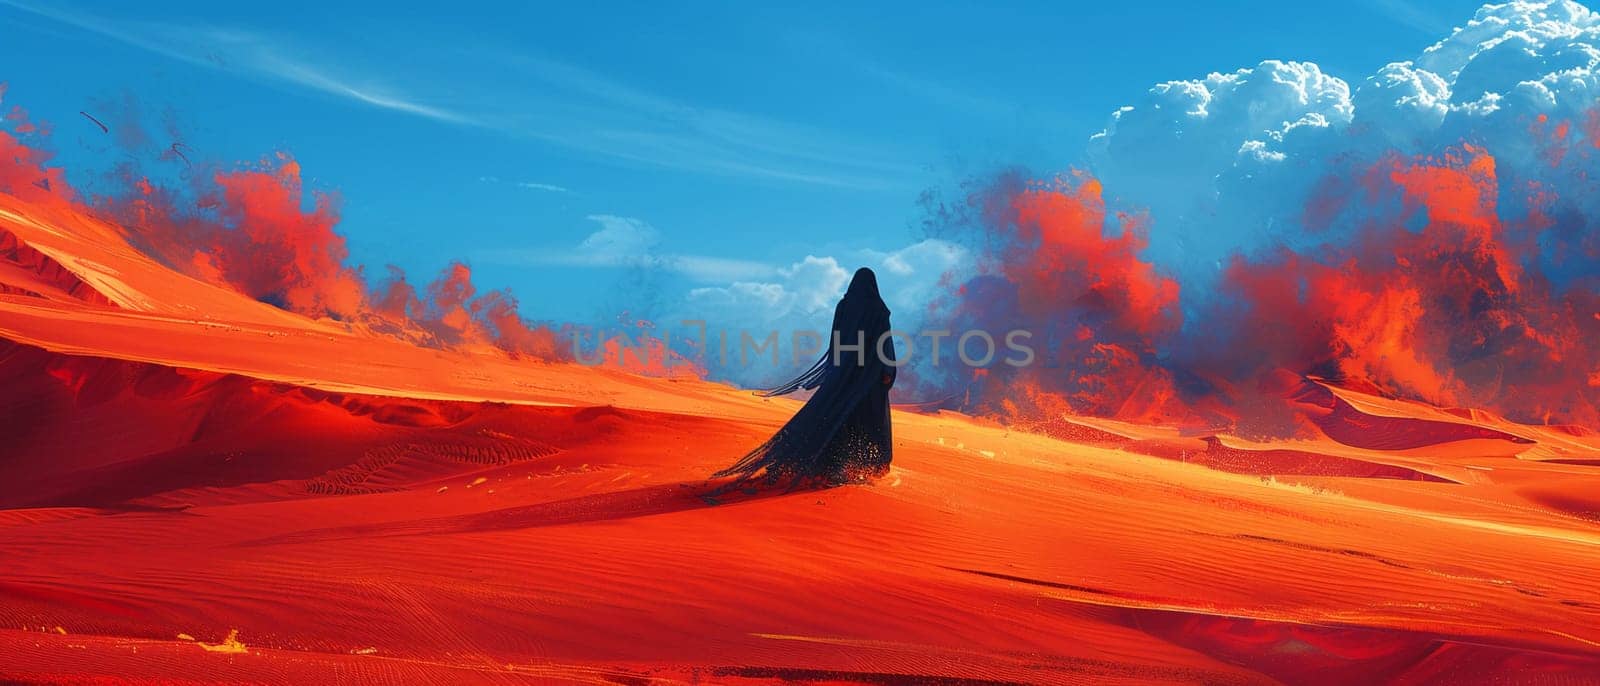 Desert nomad's silhouette against a vast dune, rendered in a minimalist style with an endless horizon.